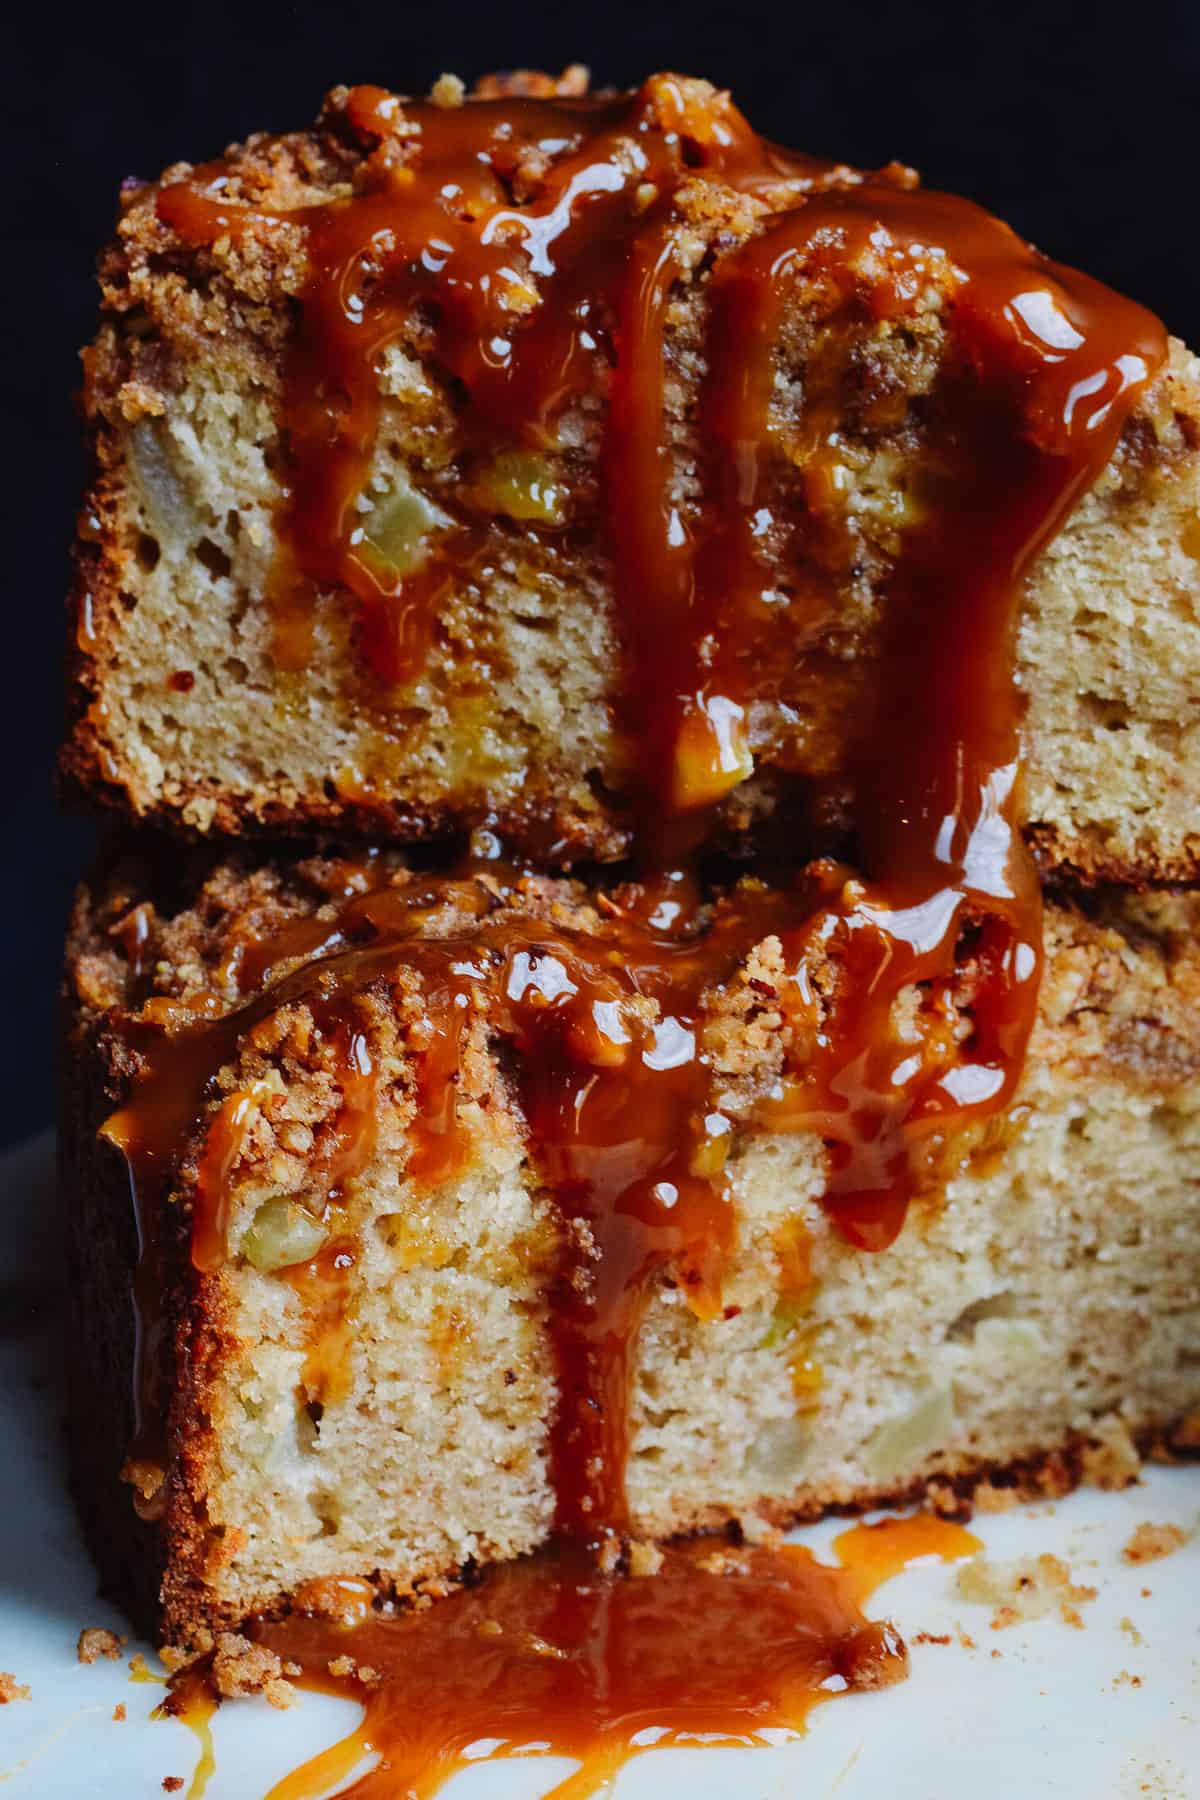 Caramel sauce drizzled over slices of caramel apple cake.